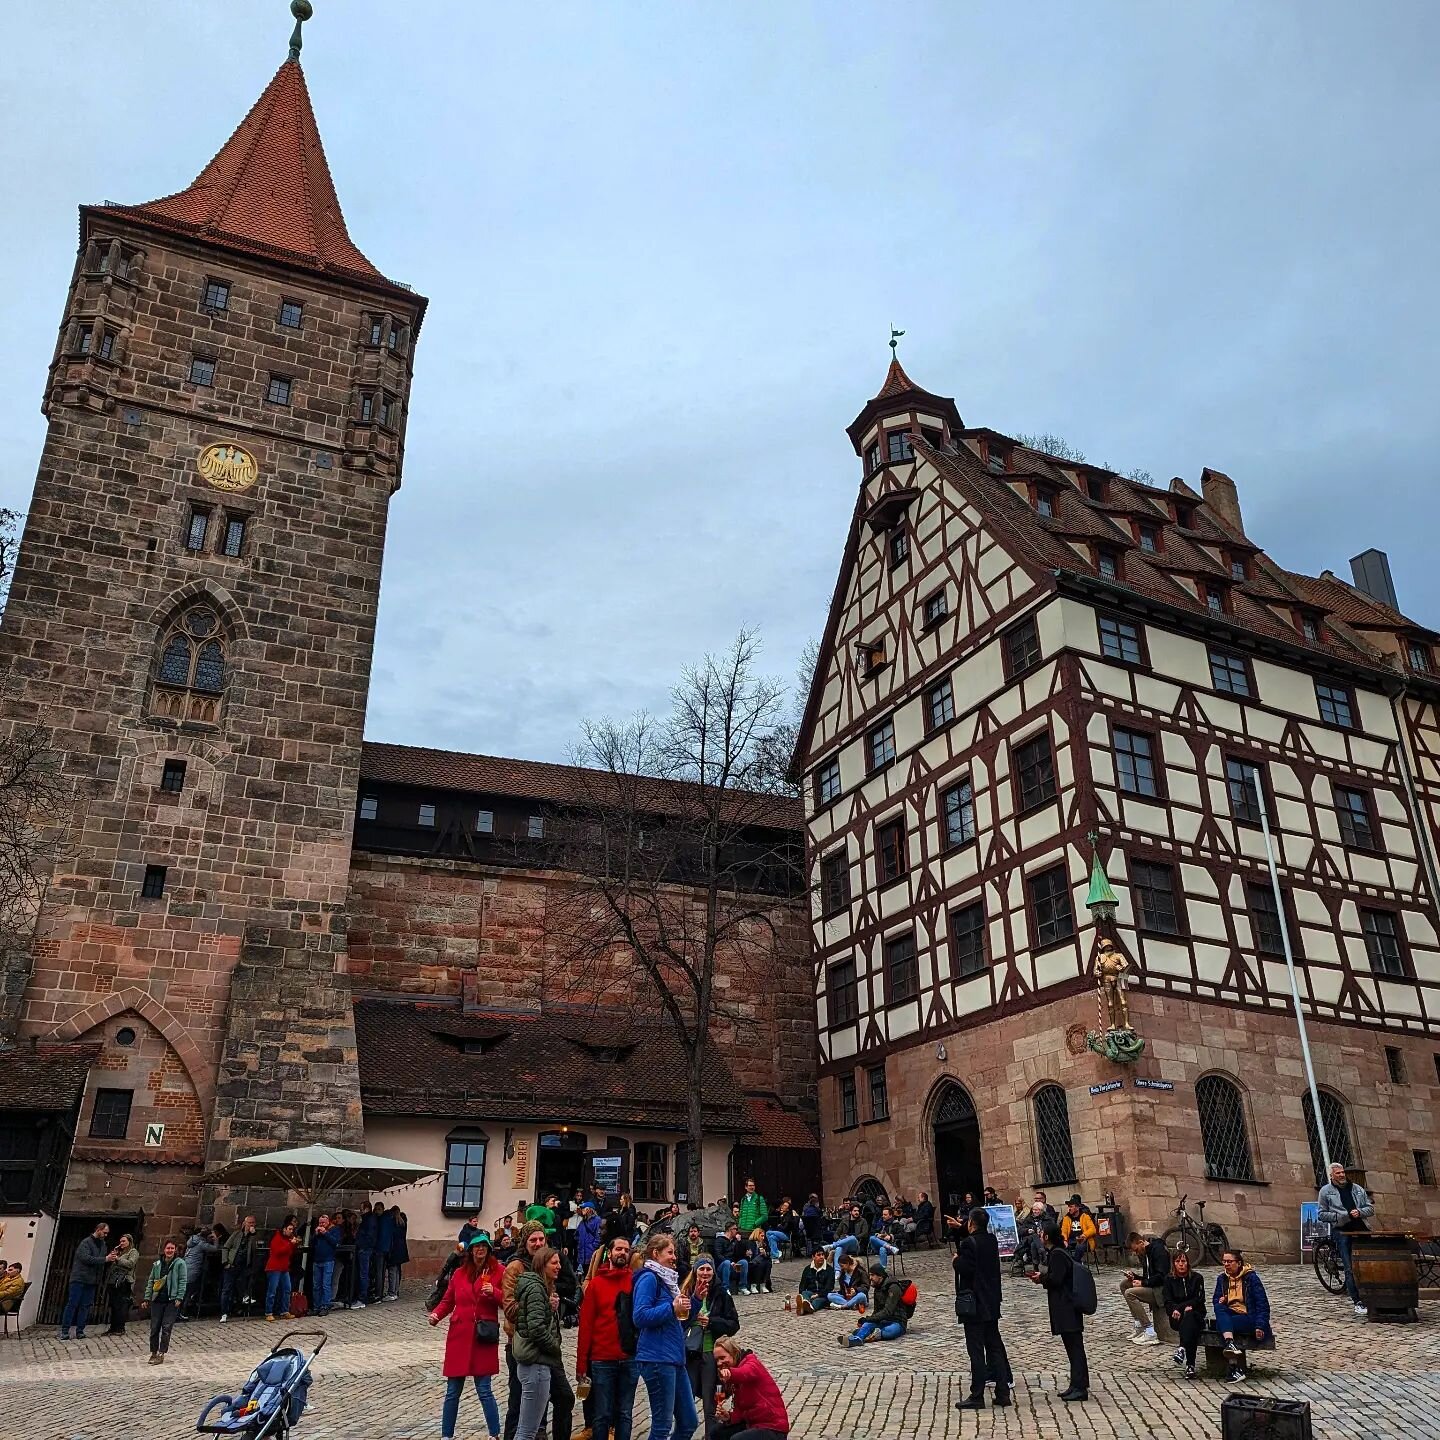 More #Disney fakery afoot in N&uuml;rnberg. Gimme a break guys, you're not fooling anyone. #n&uuml;rnberg #germany #history #medieval #fake #fakenews #building  #castle #buildingphotography #archidaily #architecture #architechturephotography #timber